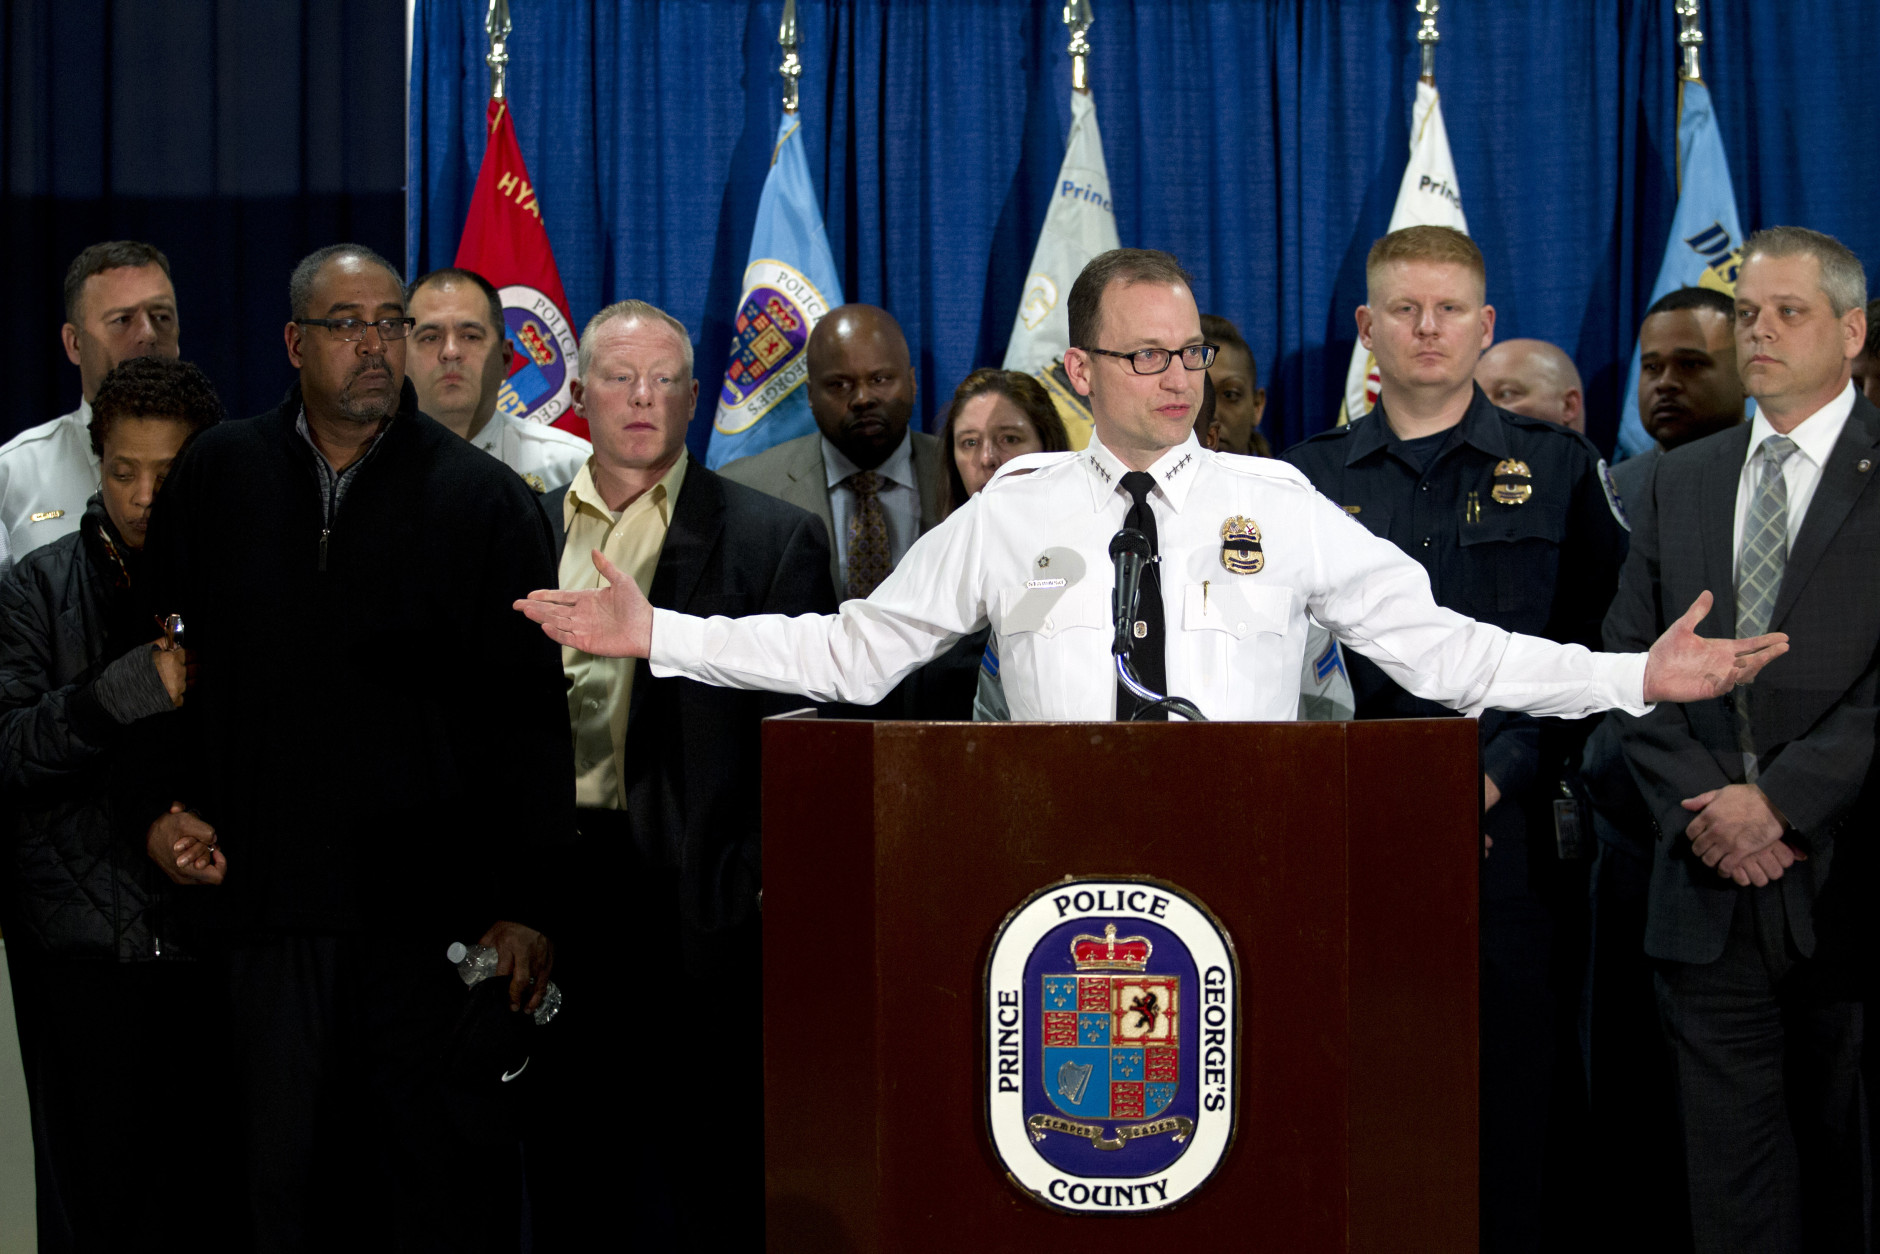 Prince George's County police chief Hank Stawinski accompanied by the parents of police officer Jacai Colson, James and Sheila Colson speaks during a news conference at Prince George's County Police headquarters Monday, March 14, 2016, in Hyattsville, Md. Colson, a four-year veteran of the force was shot outside the District III police station. ( AP Photo/Jose Luis Magana)